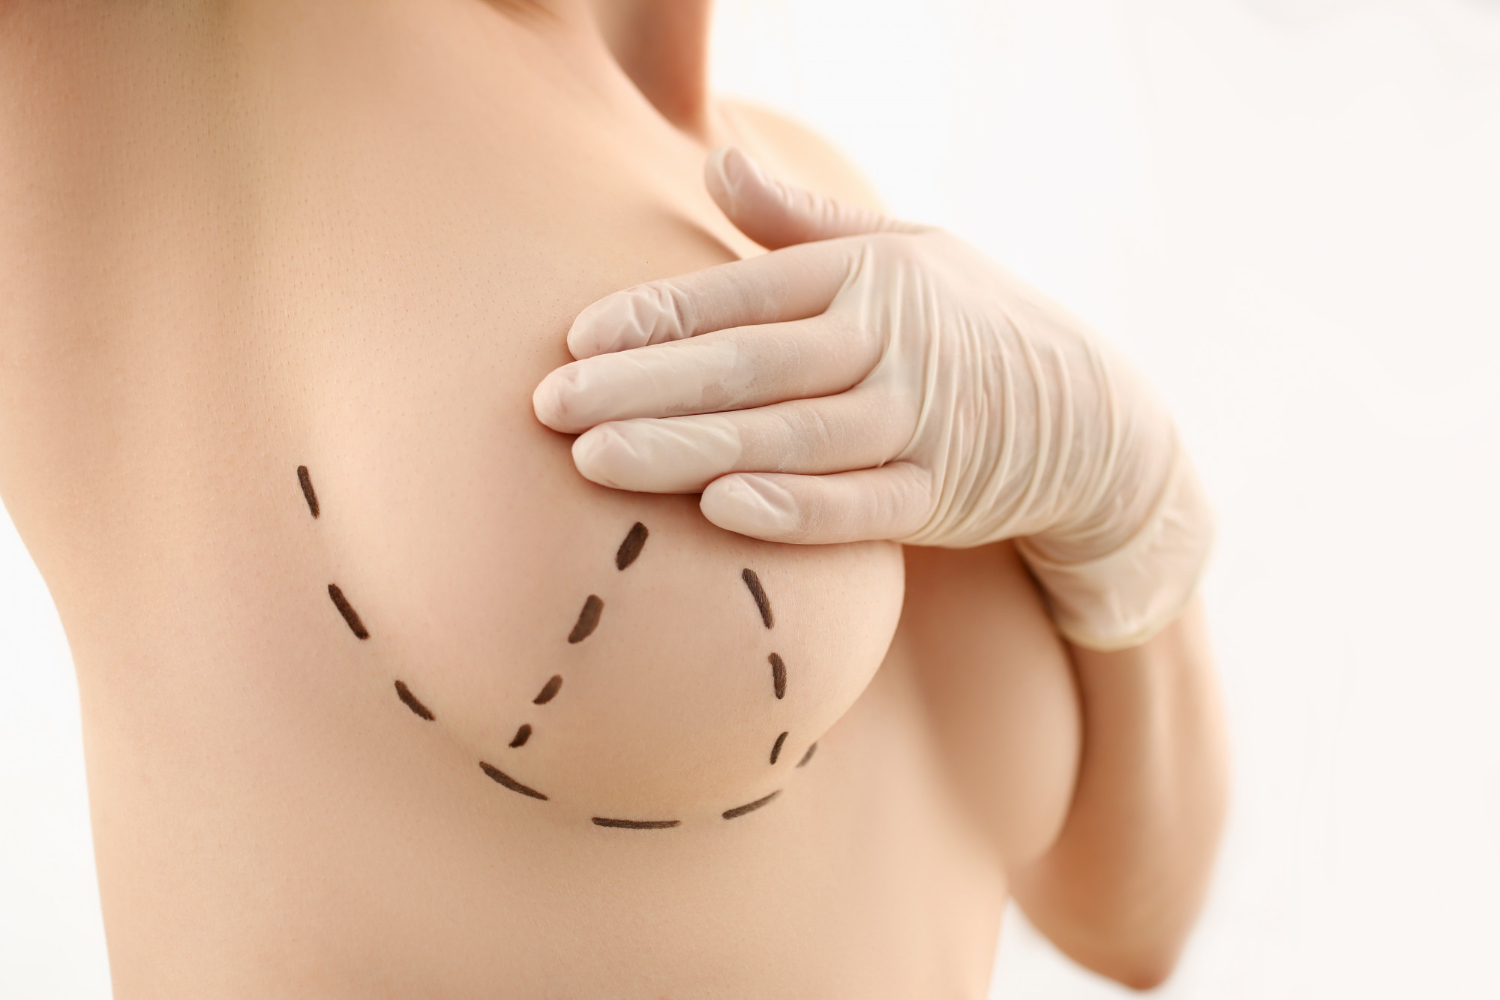 Forget silicone, now there's a breast lift on the inside - ISRAEL21c